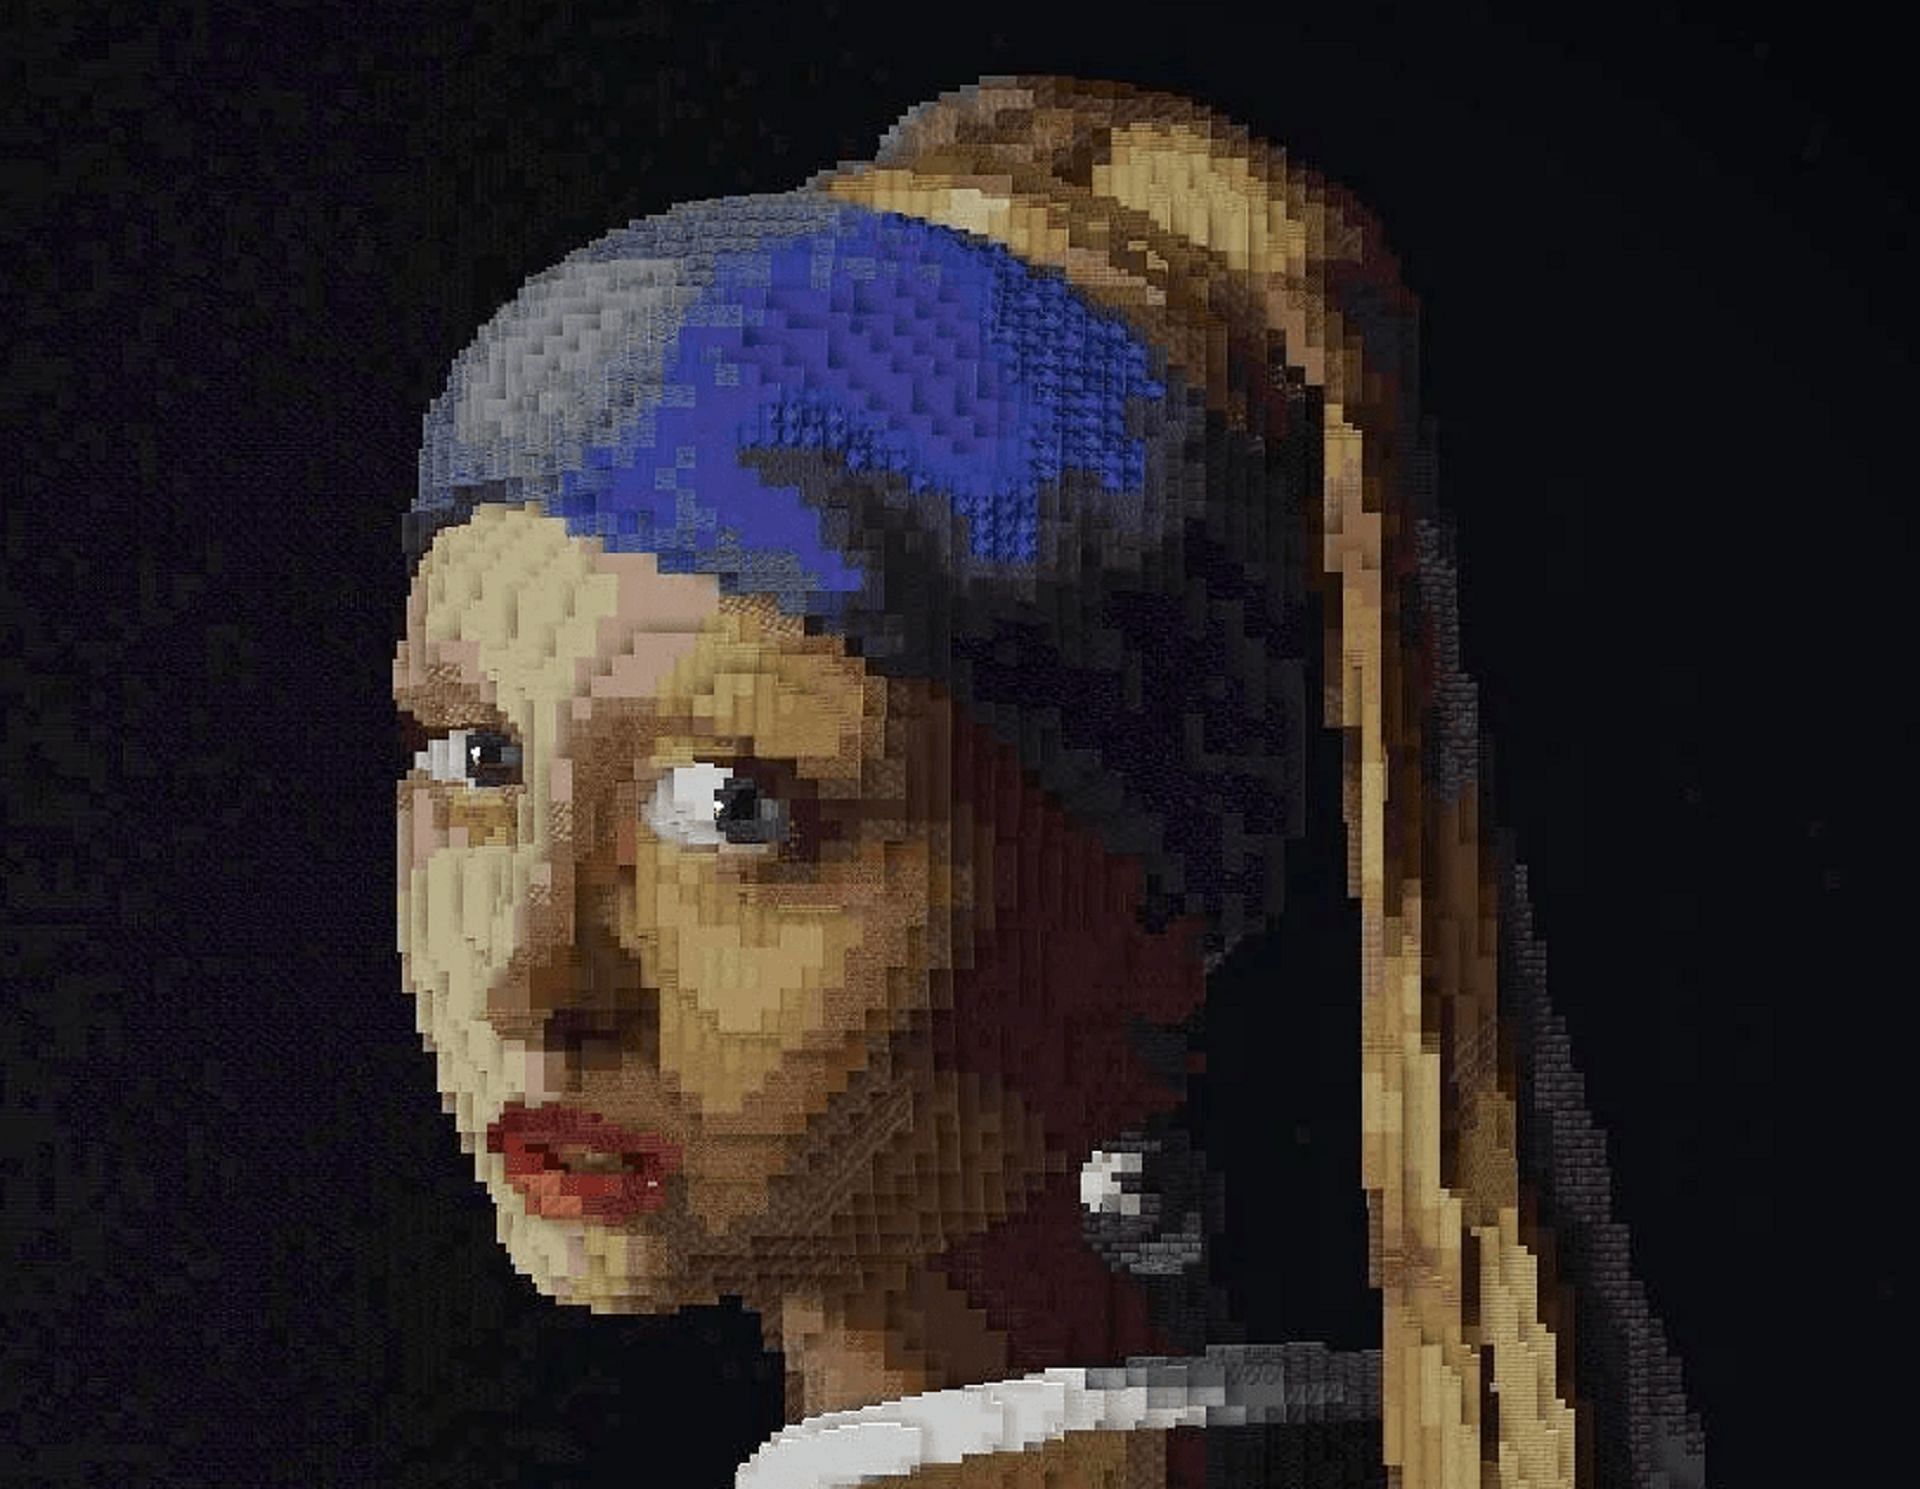 One of the most recognizable classical art pieces recreated in Minecraft (Image via u/EquyNoxious/Reddit)